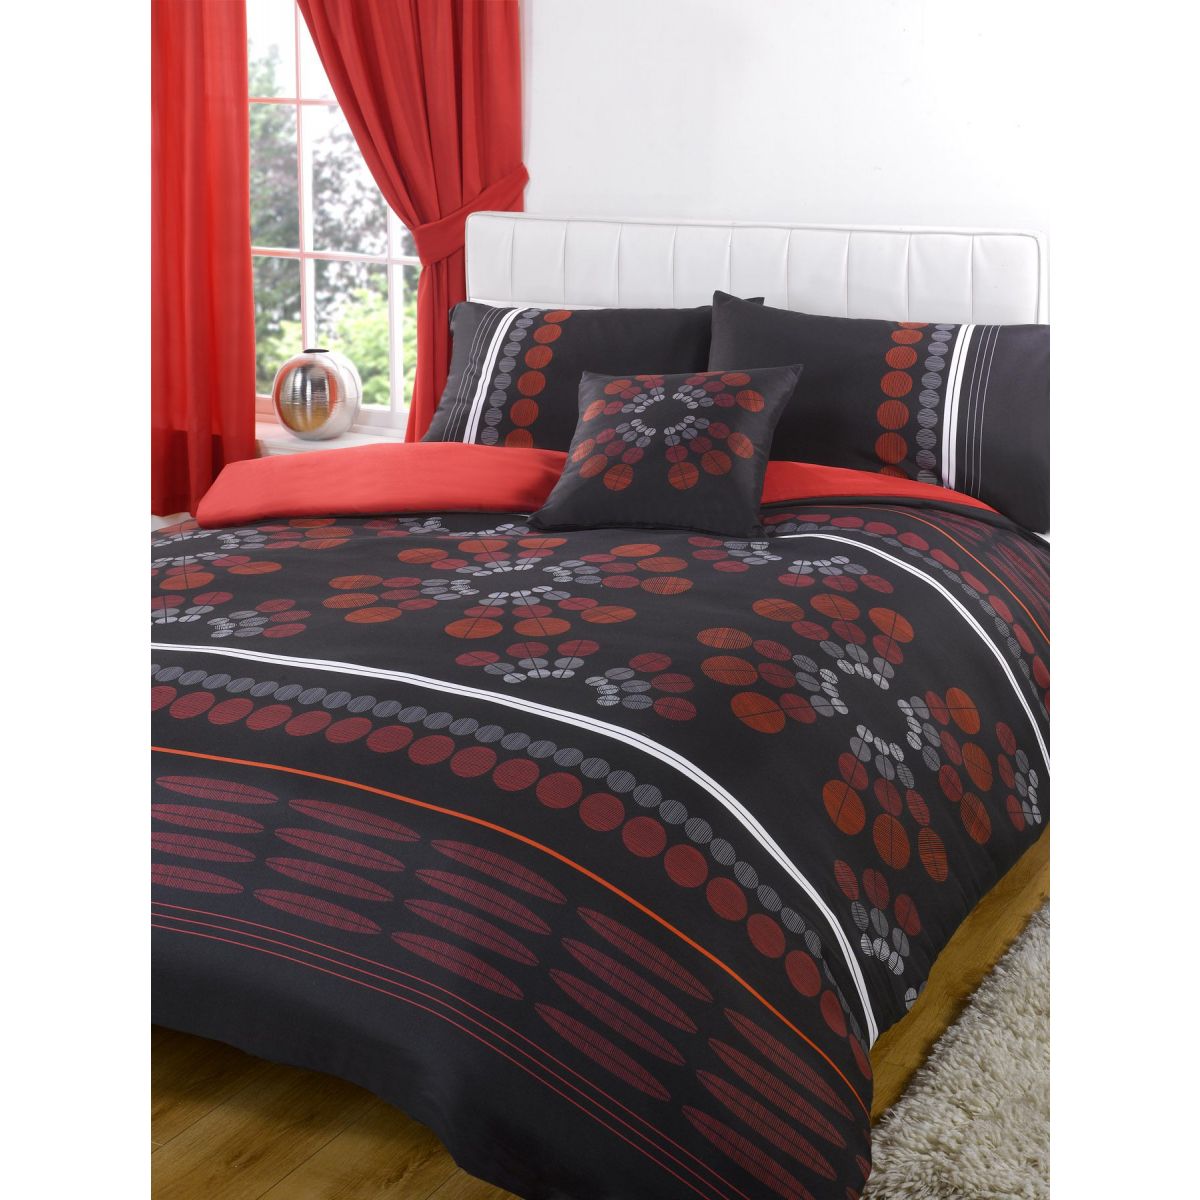 Aster Bumper Bedding Set with Curtains, Black/Red - Single